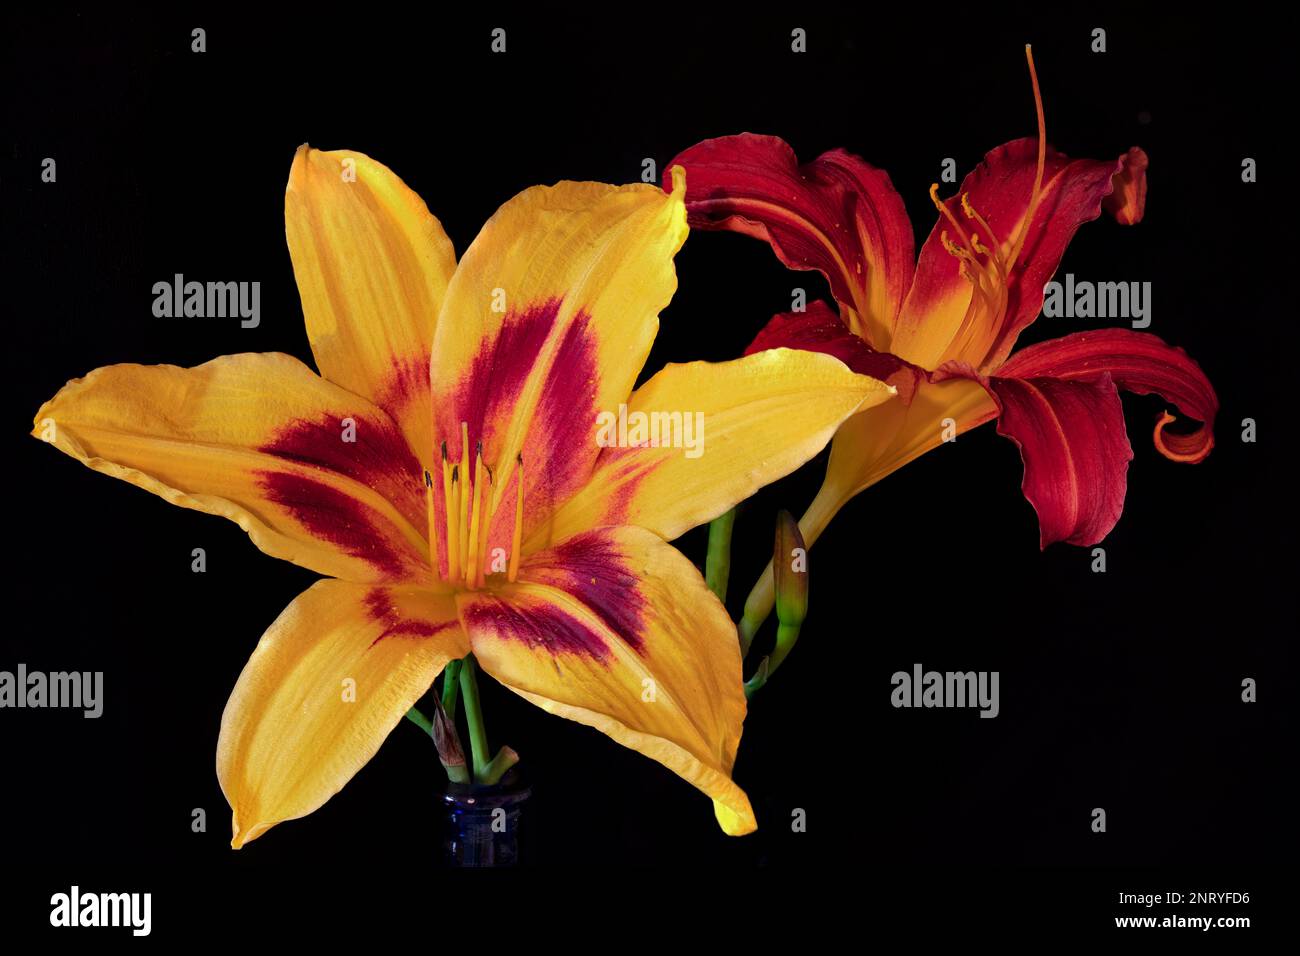 These brilliant wood lilies from our garden look even more vivid against an inky black backdrop. Stock Photo